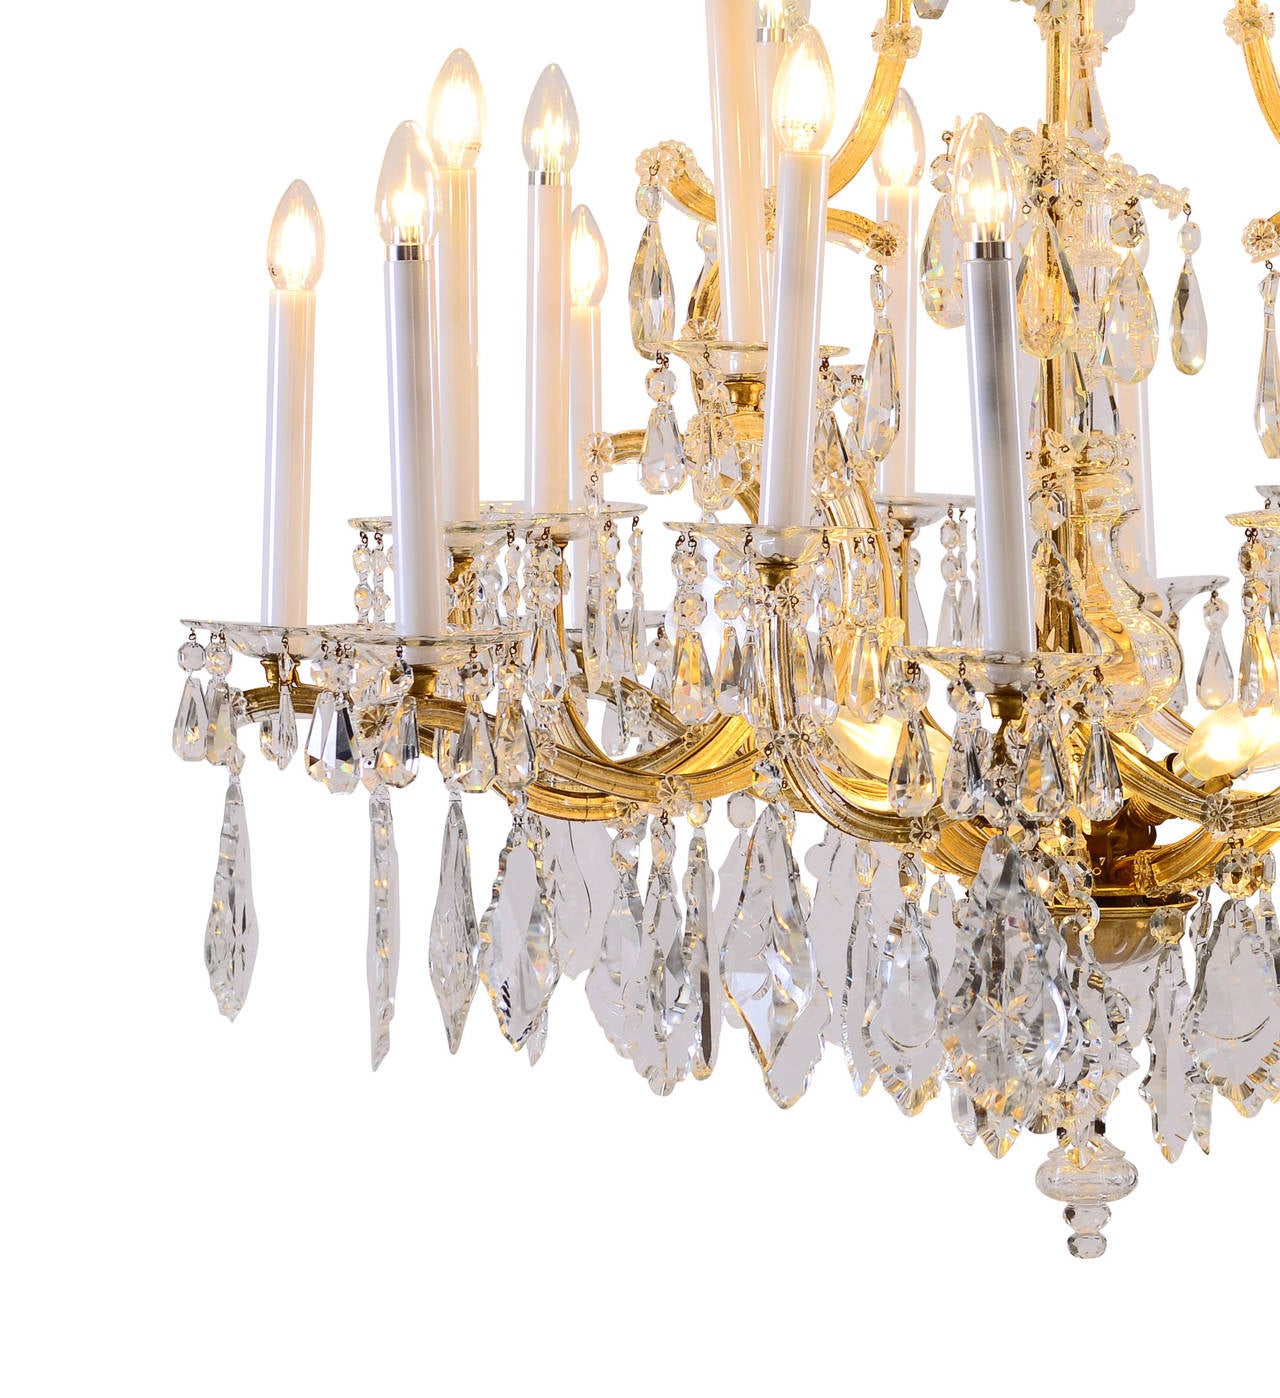 Early 20th Century Original Lobmeyr Maria Theresien Crystal Chandelier, Richly Decorated 28 Lights For Sale